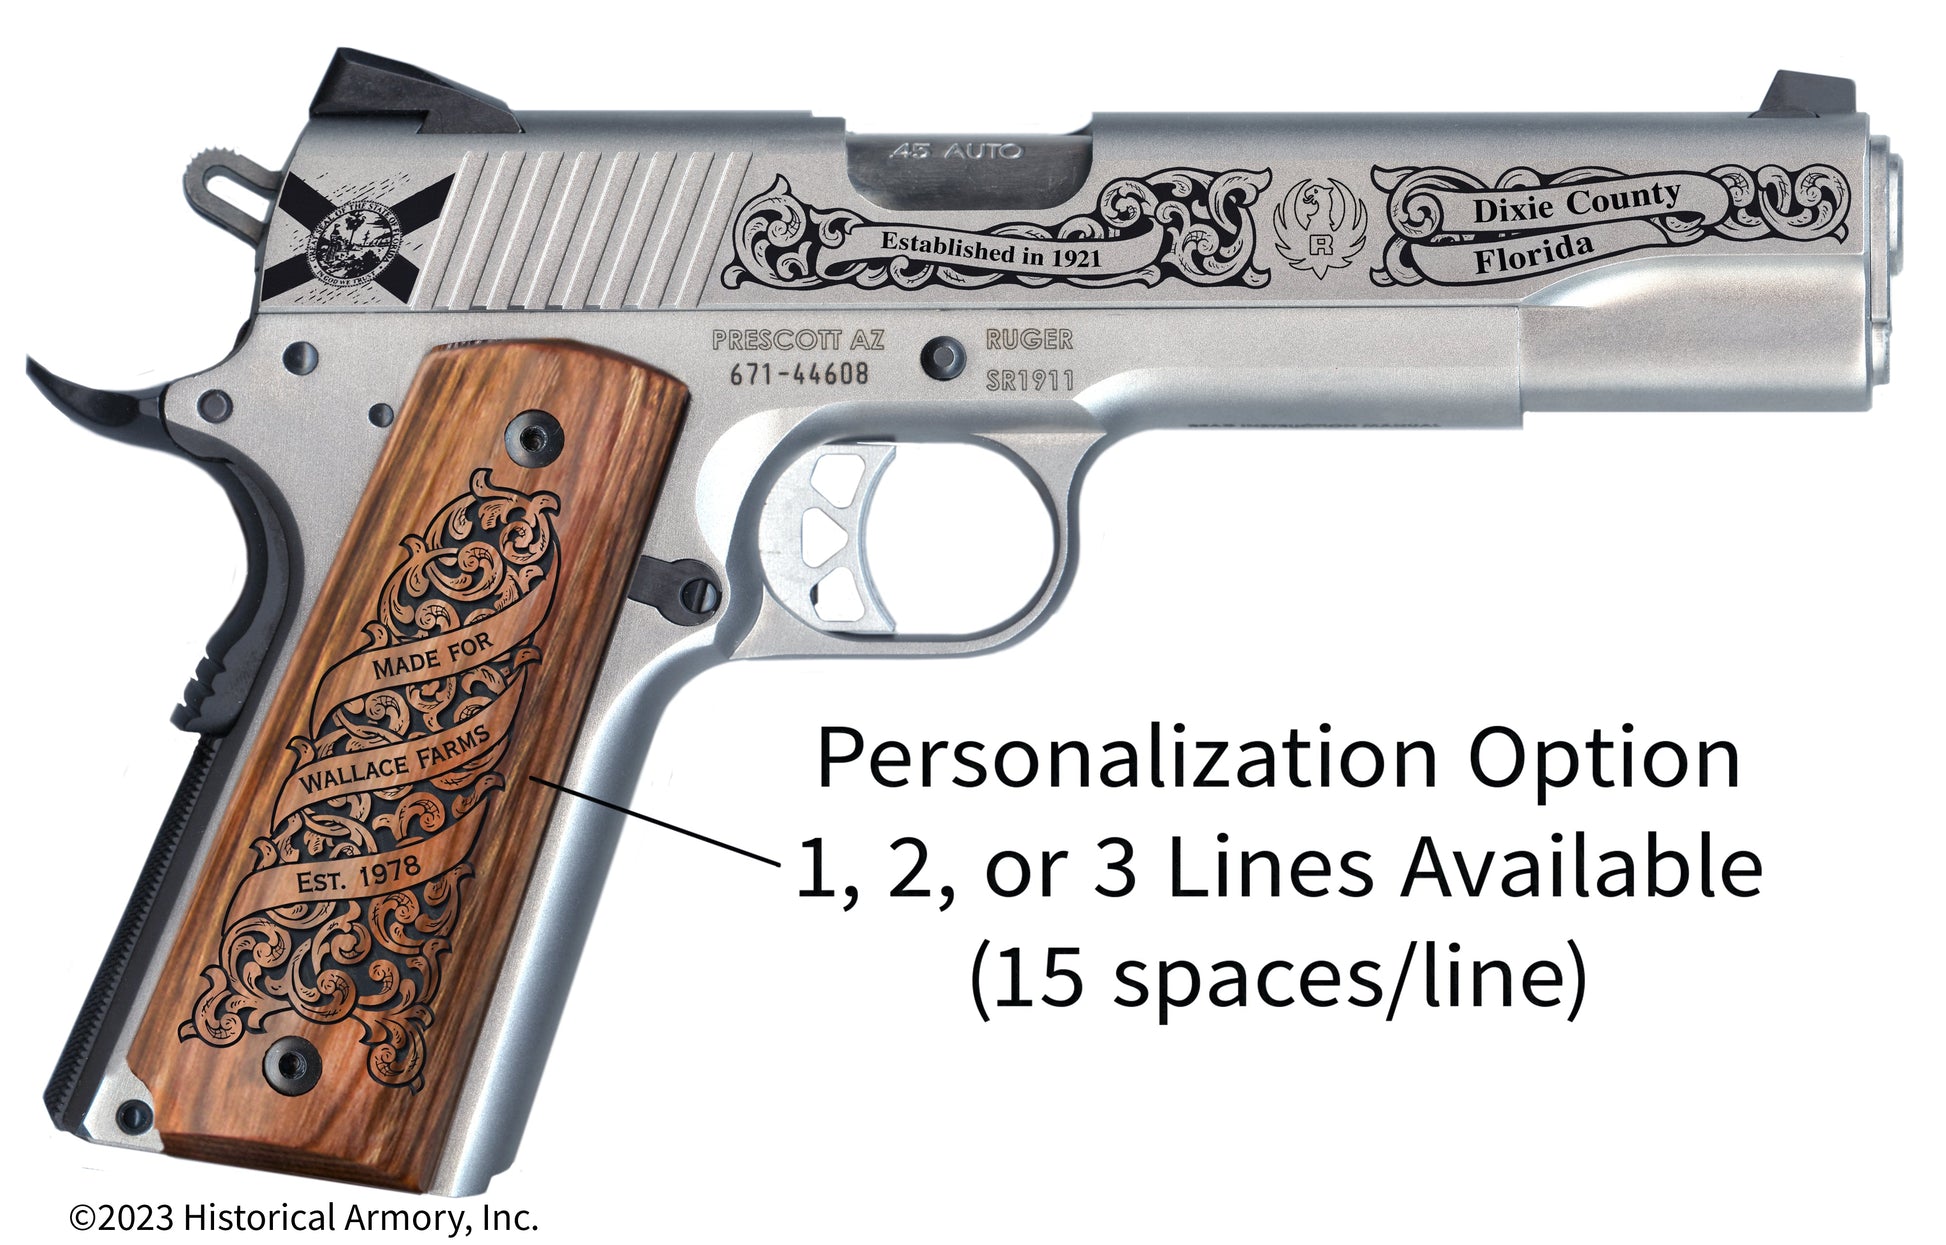 Dixie County Florida Personalized Engraved .45 Auto Ruger 1911